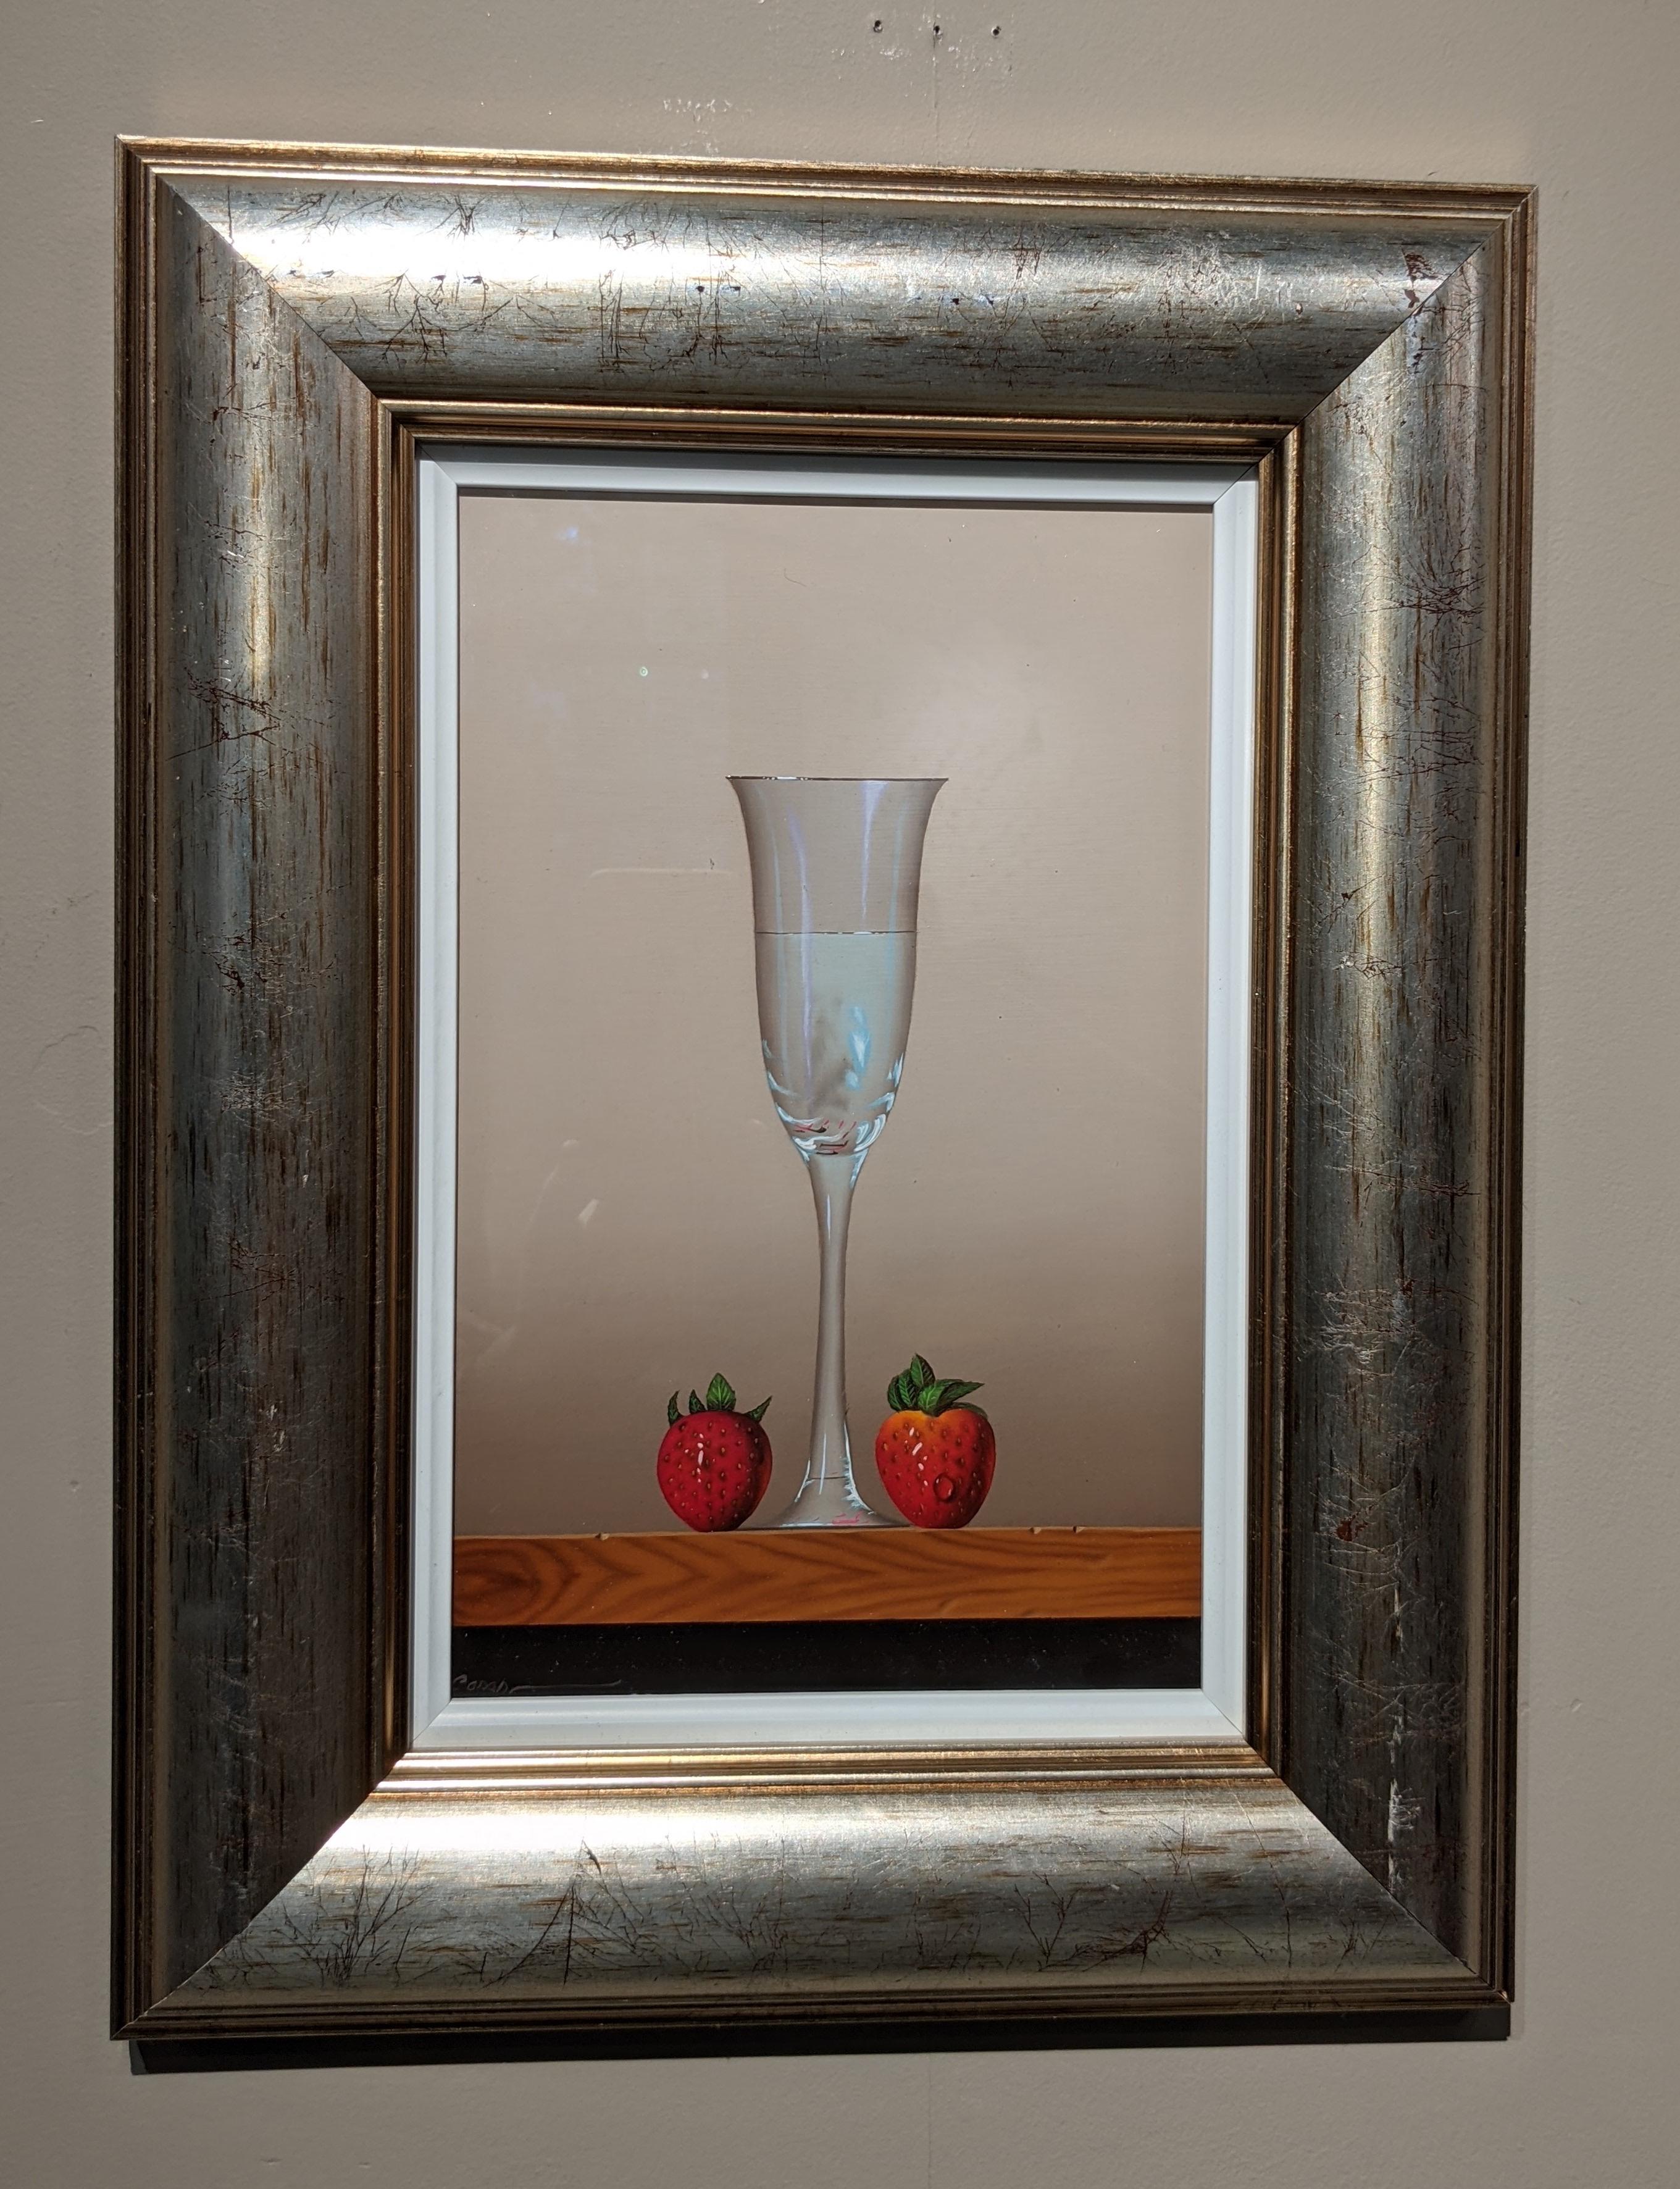 Casas Still-Life Painting - Contemporary Still Life 'Glass & Strawberries' Photo realist painting, red